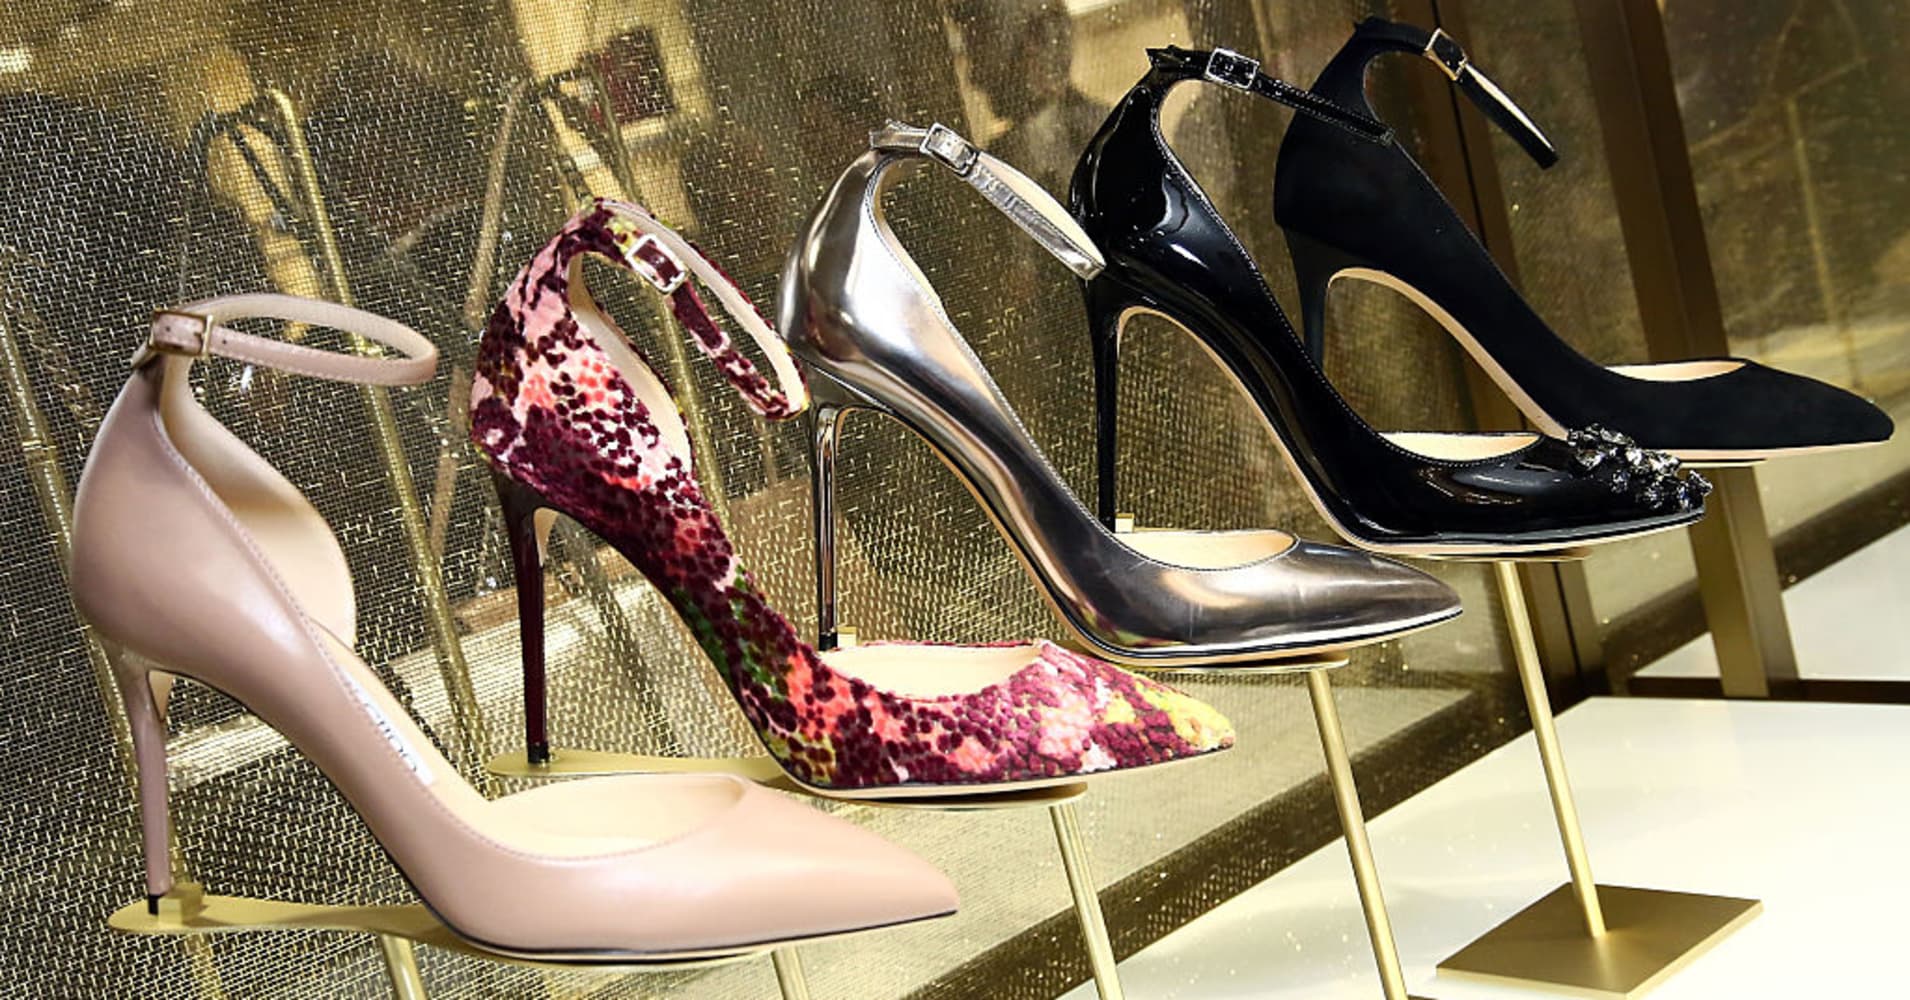 Luxury fashion brand Jimmy Choo invites buyers to put their best foot ...